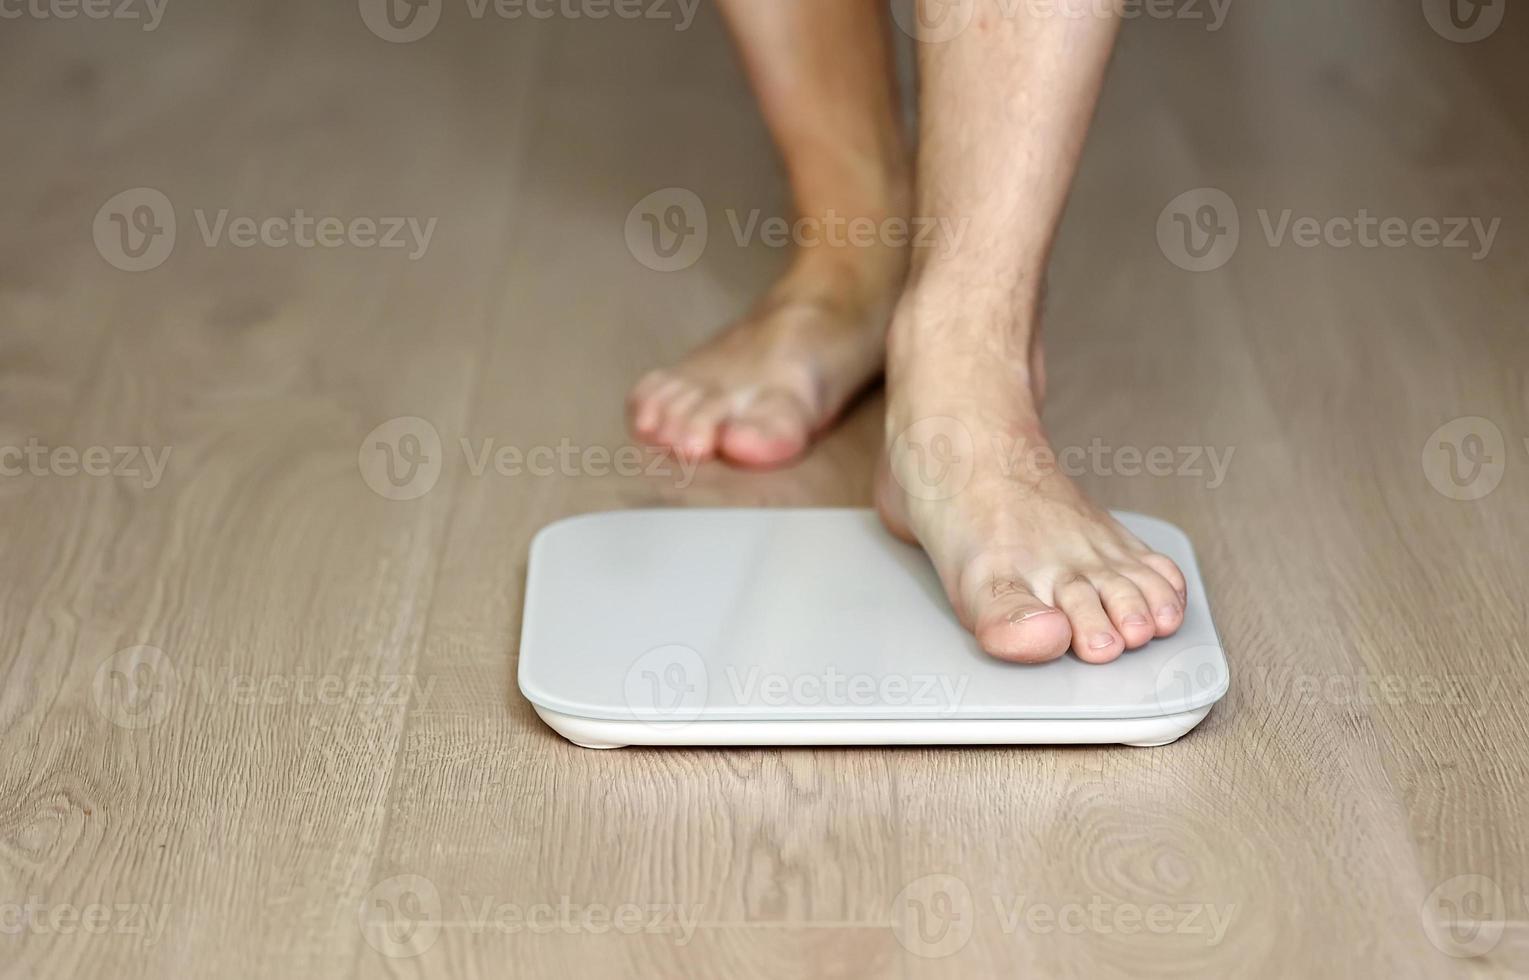 Man walking on scales measure weight. male wal checking BMI weight loss. human barefoot measuring body fat overweight. Guy legs step on bathroom scale photo